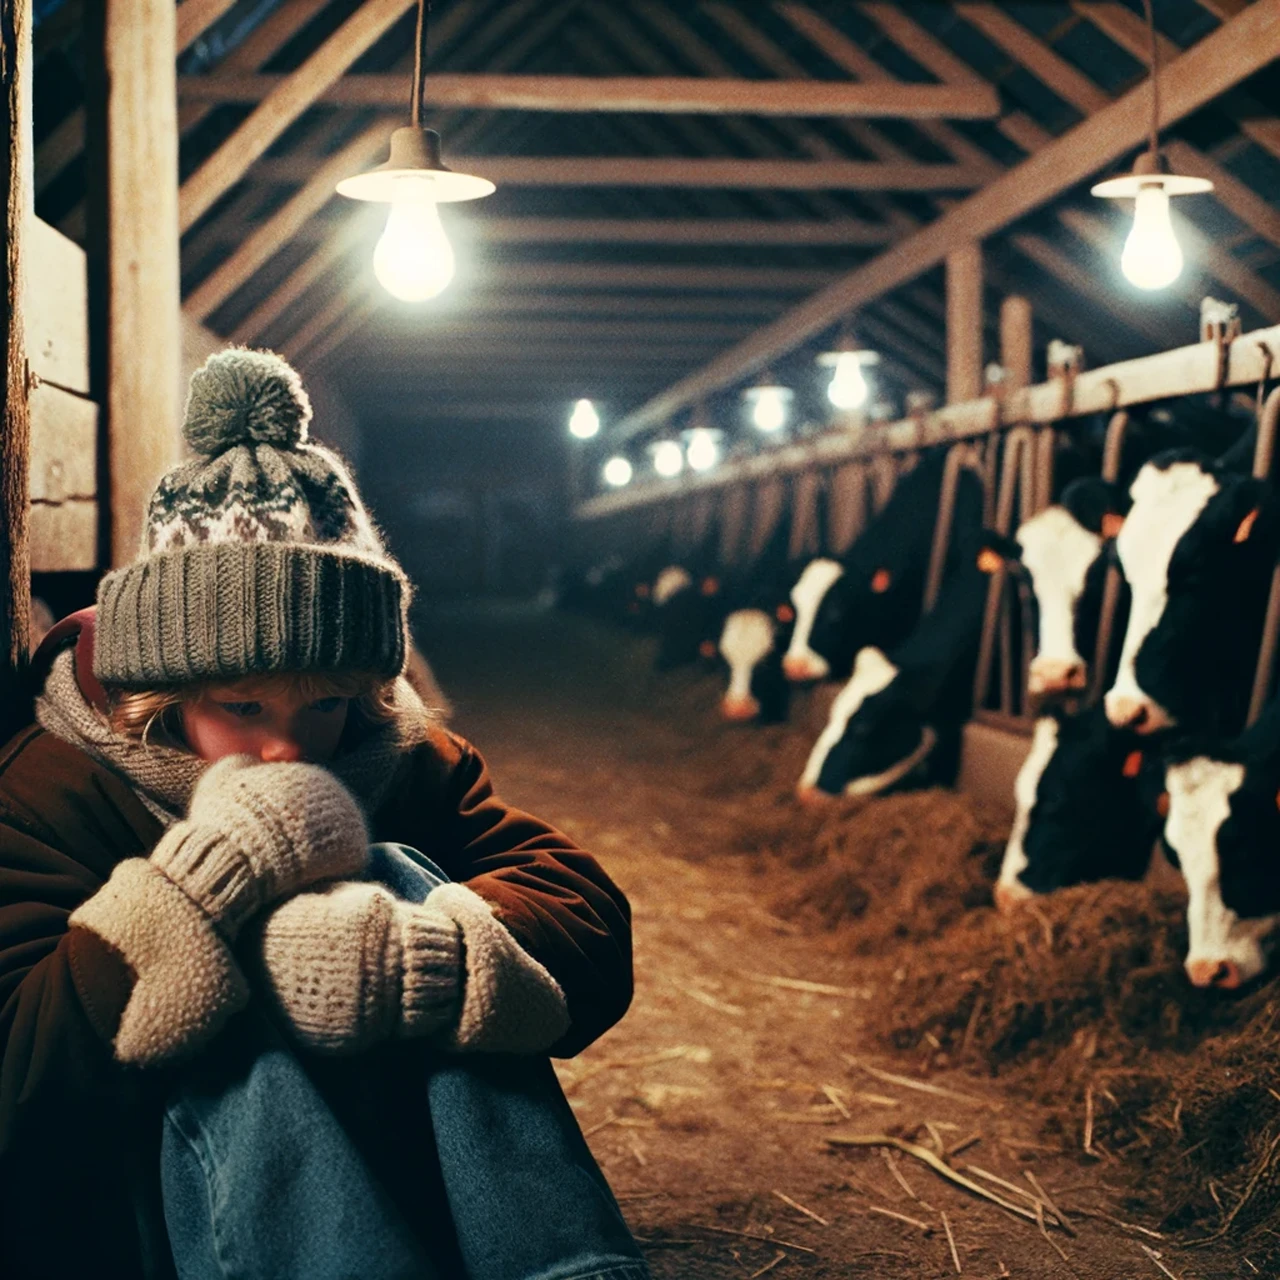 A photograph from the 1980's of a young girl staying warm in a cattle barn